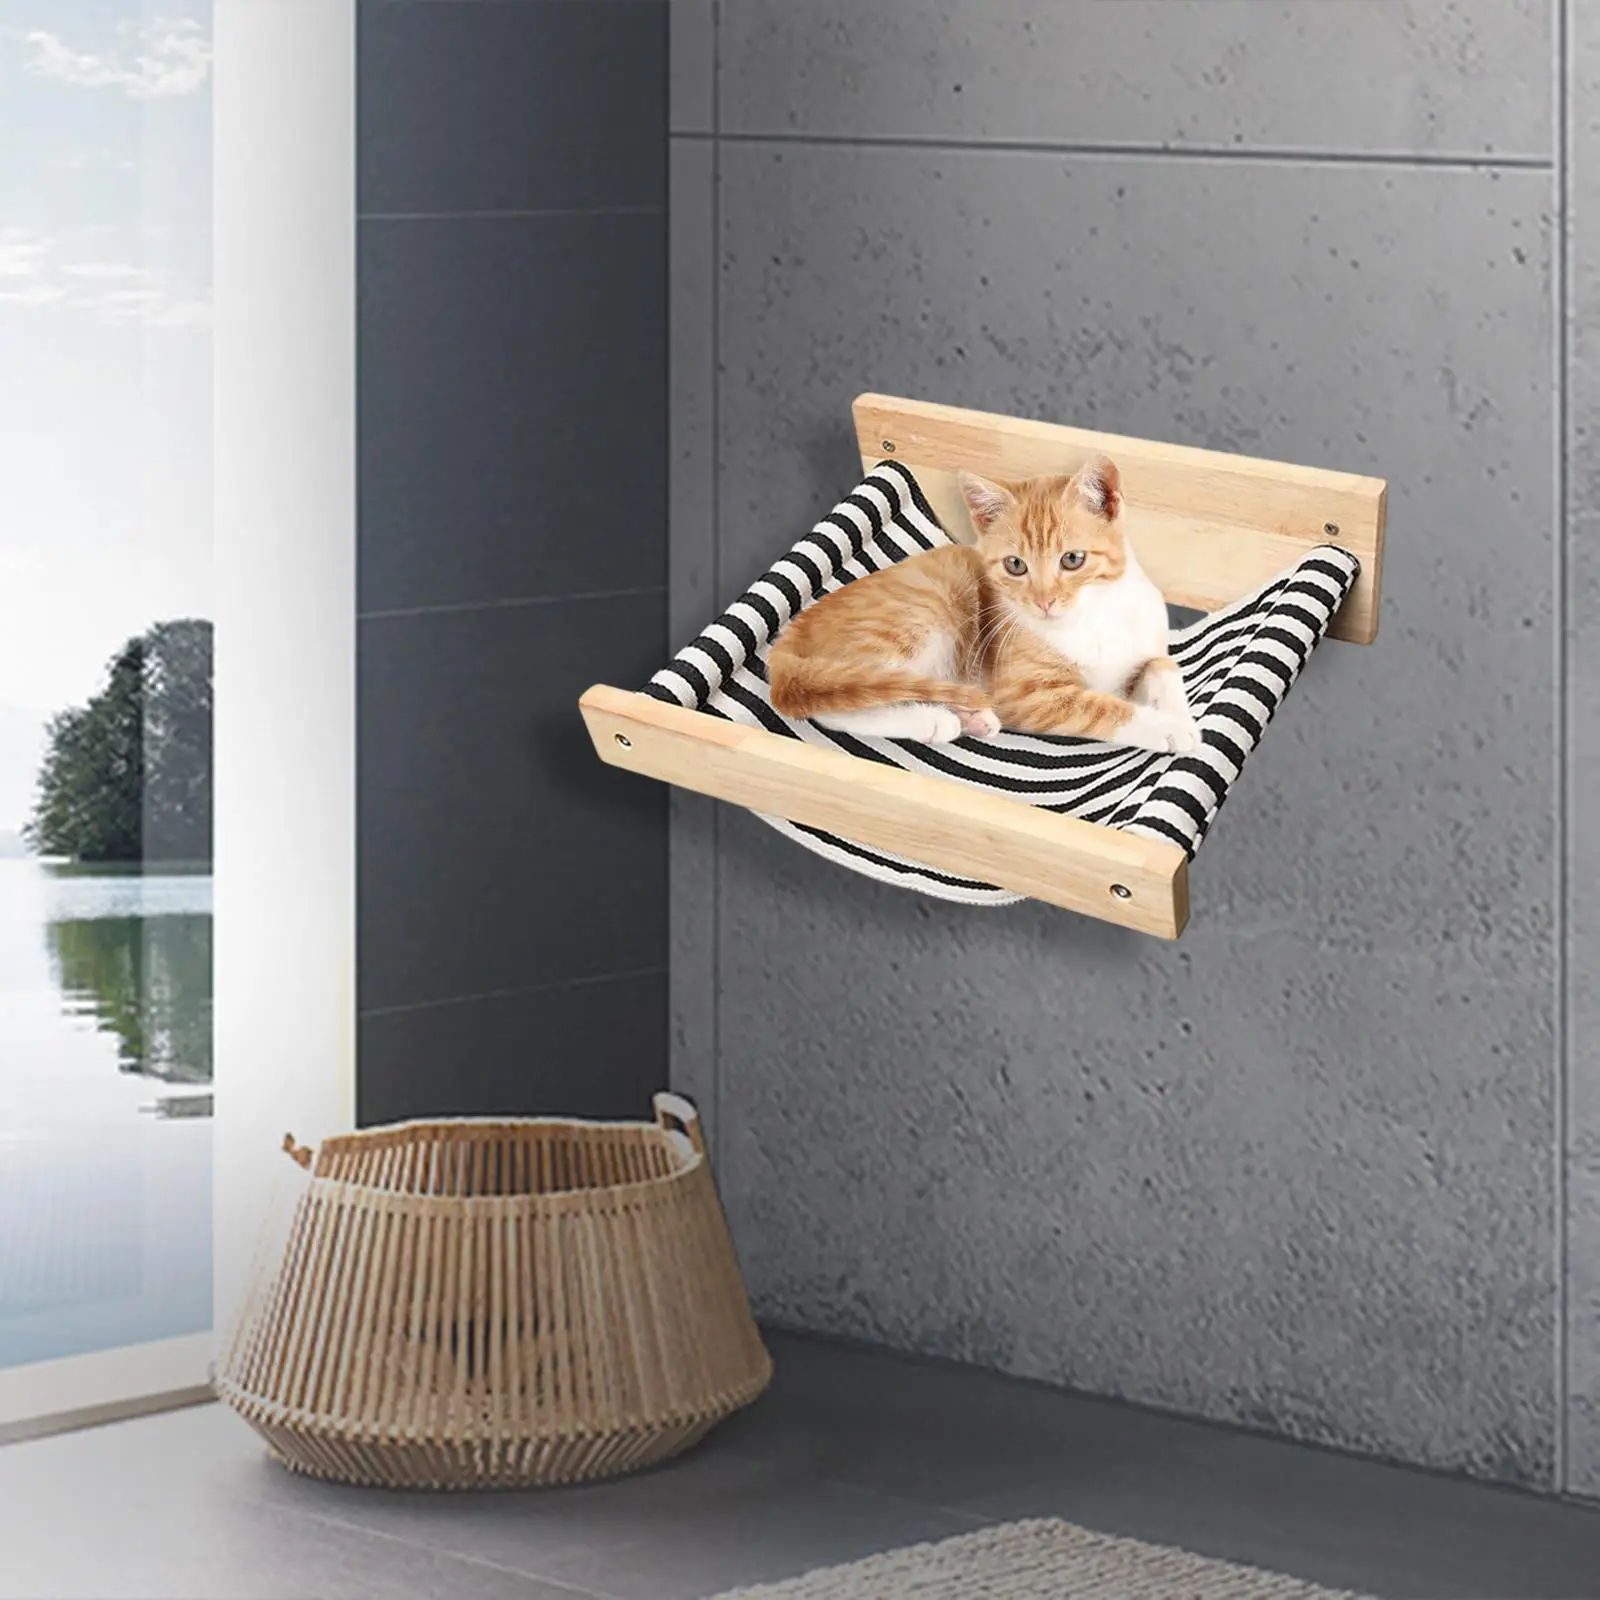 Cat Hammock Wall Mounted Solid Modern Lounging Space Saving Cat Perches for Indoor Cats Sleeping Playing Cats Wall Shelves